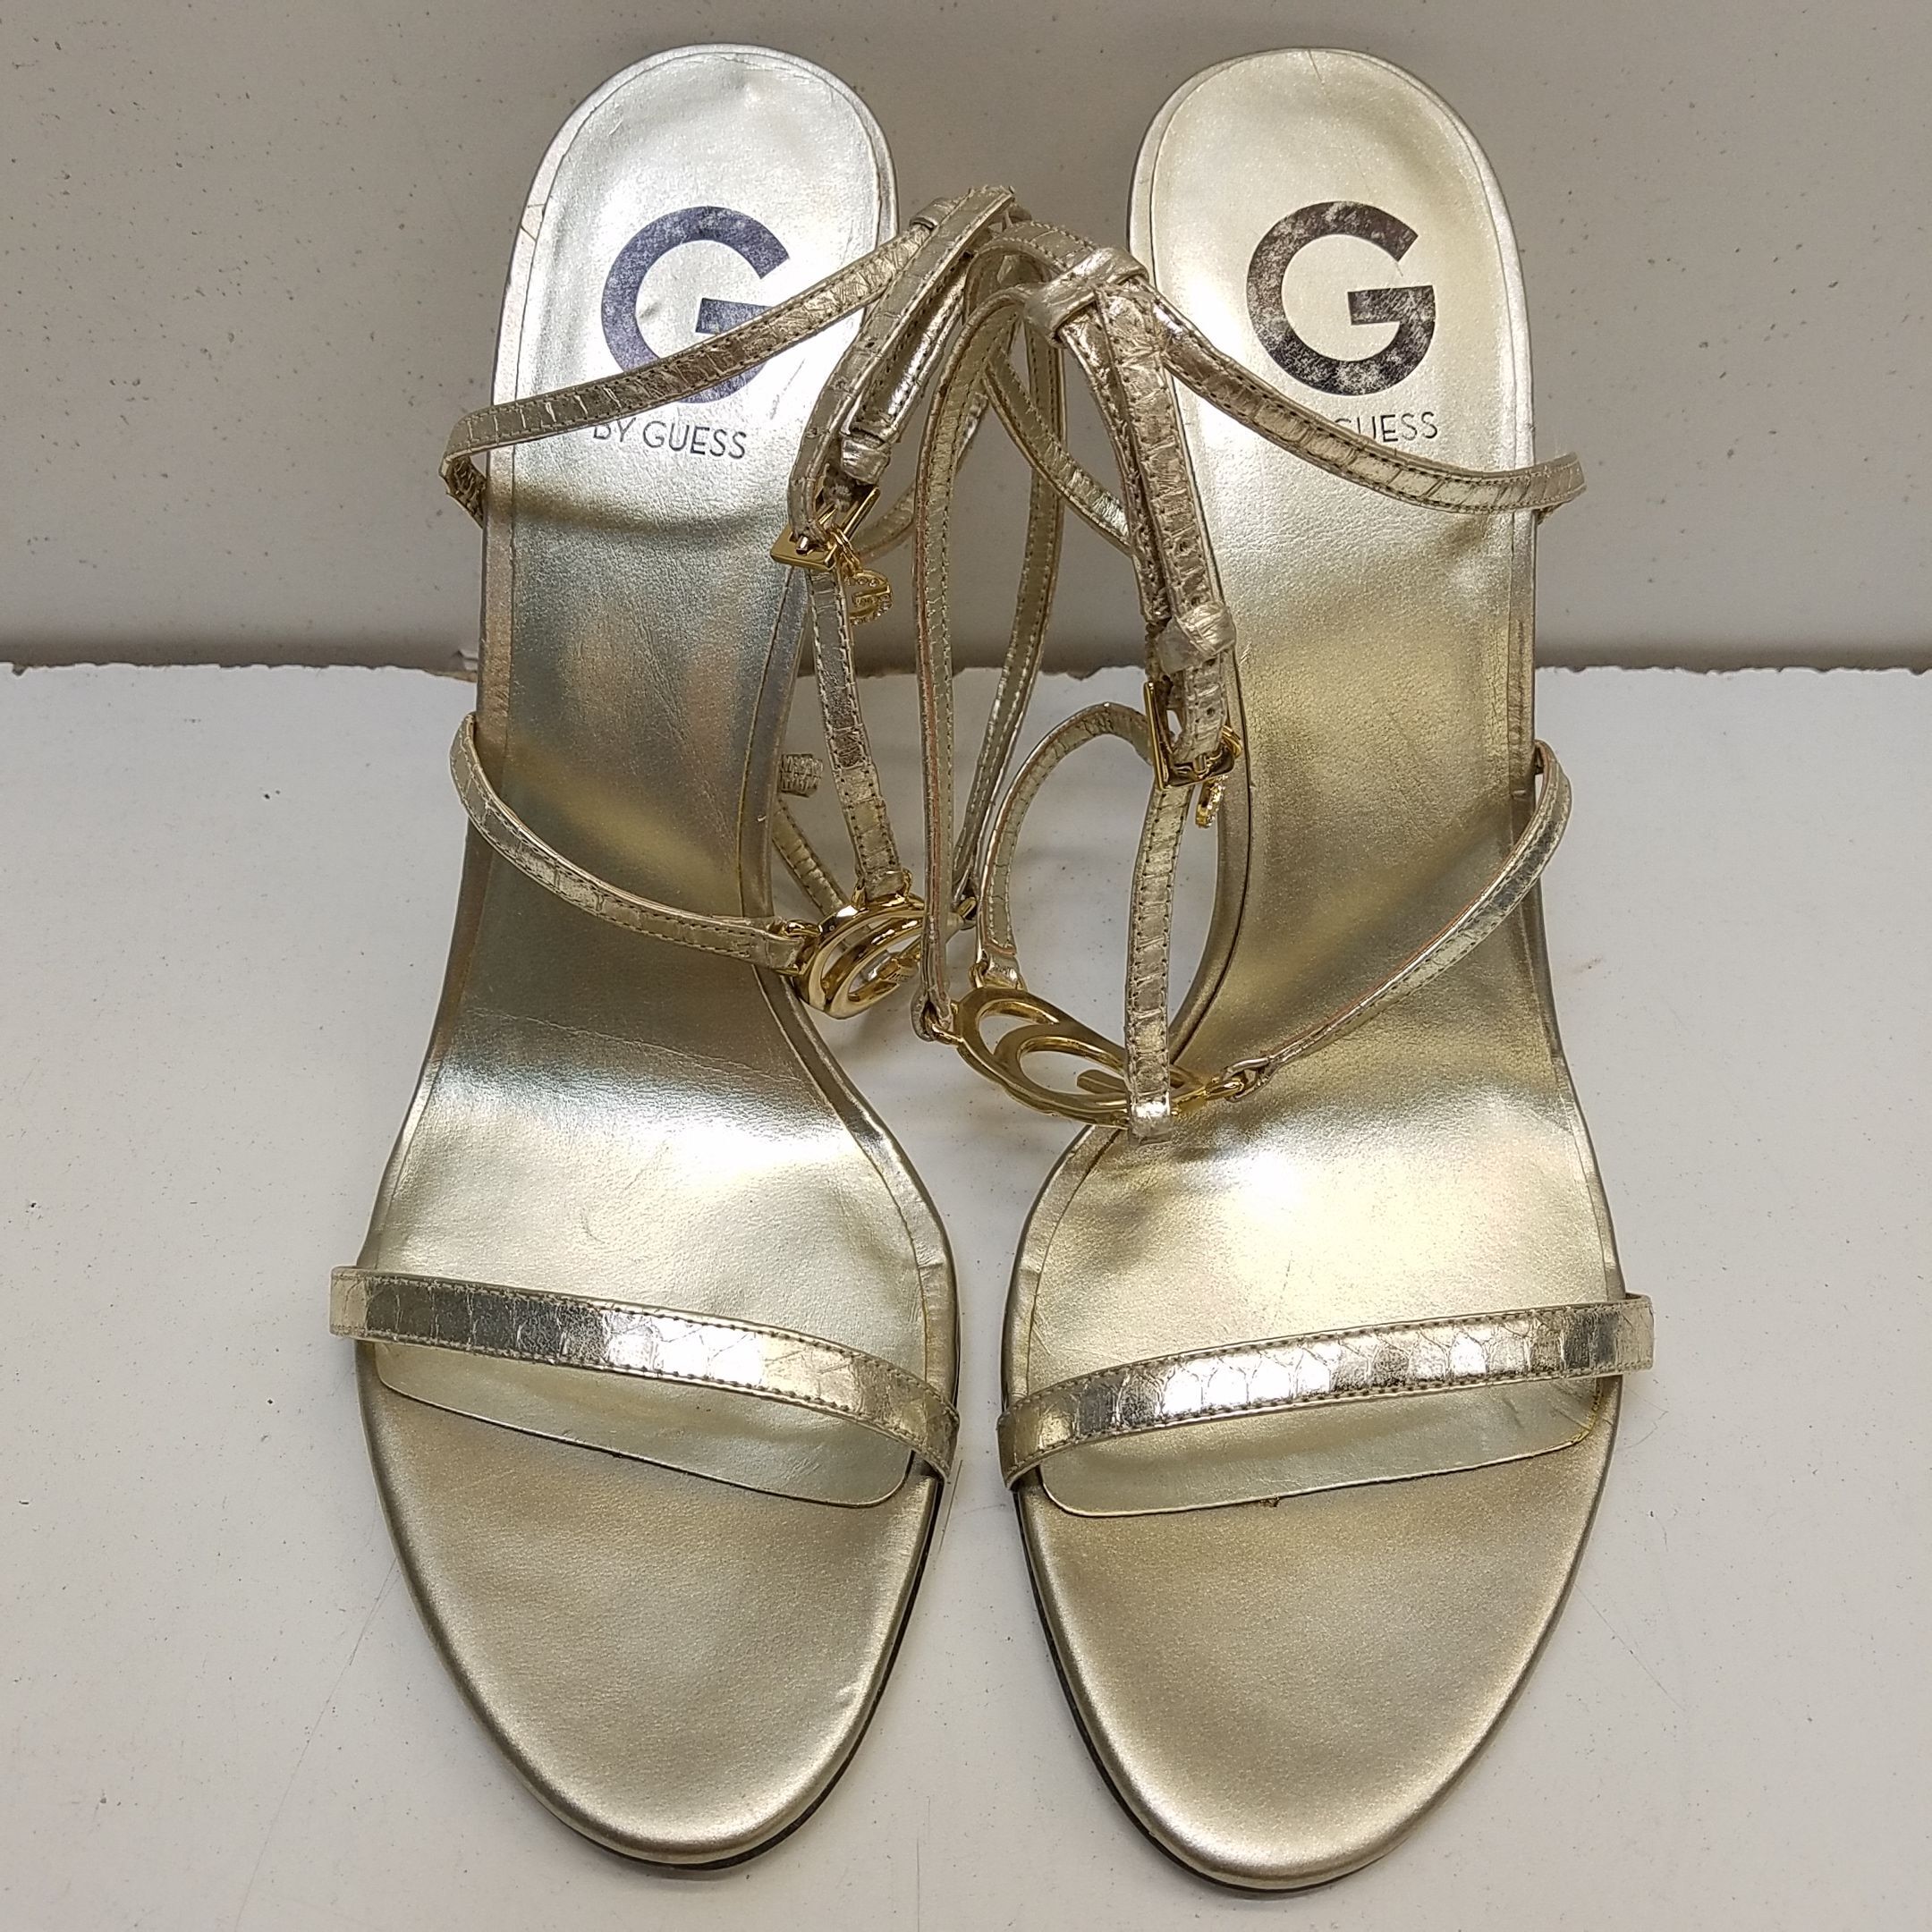 Leather heels GUESS Gold size 38 EU in Leather - 10248163